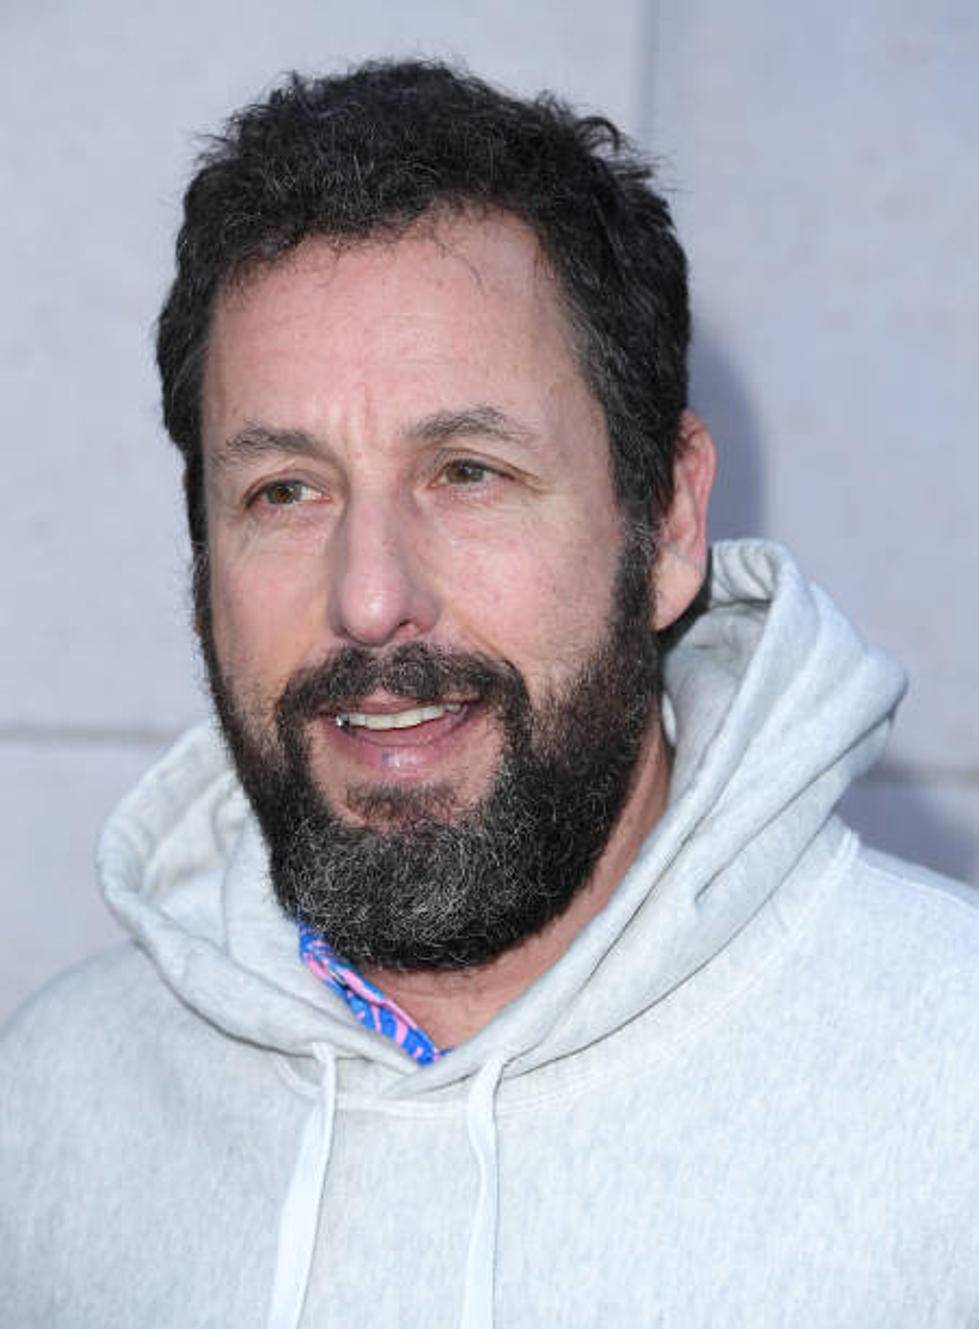 Adam Sandler Spotted In New England Over The Border Of MA.